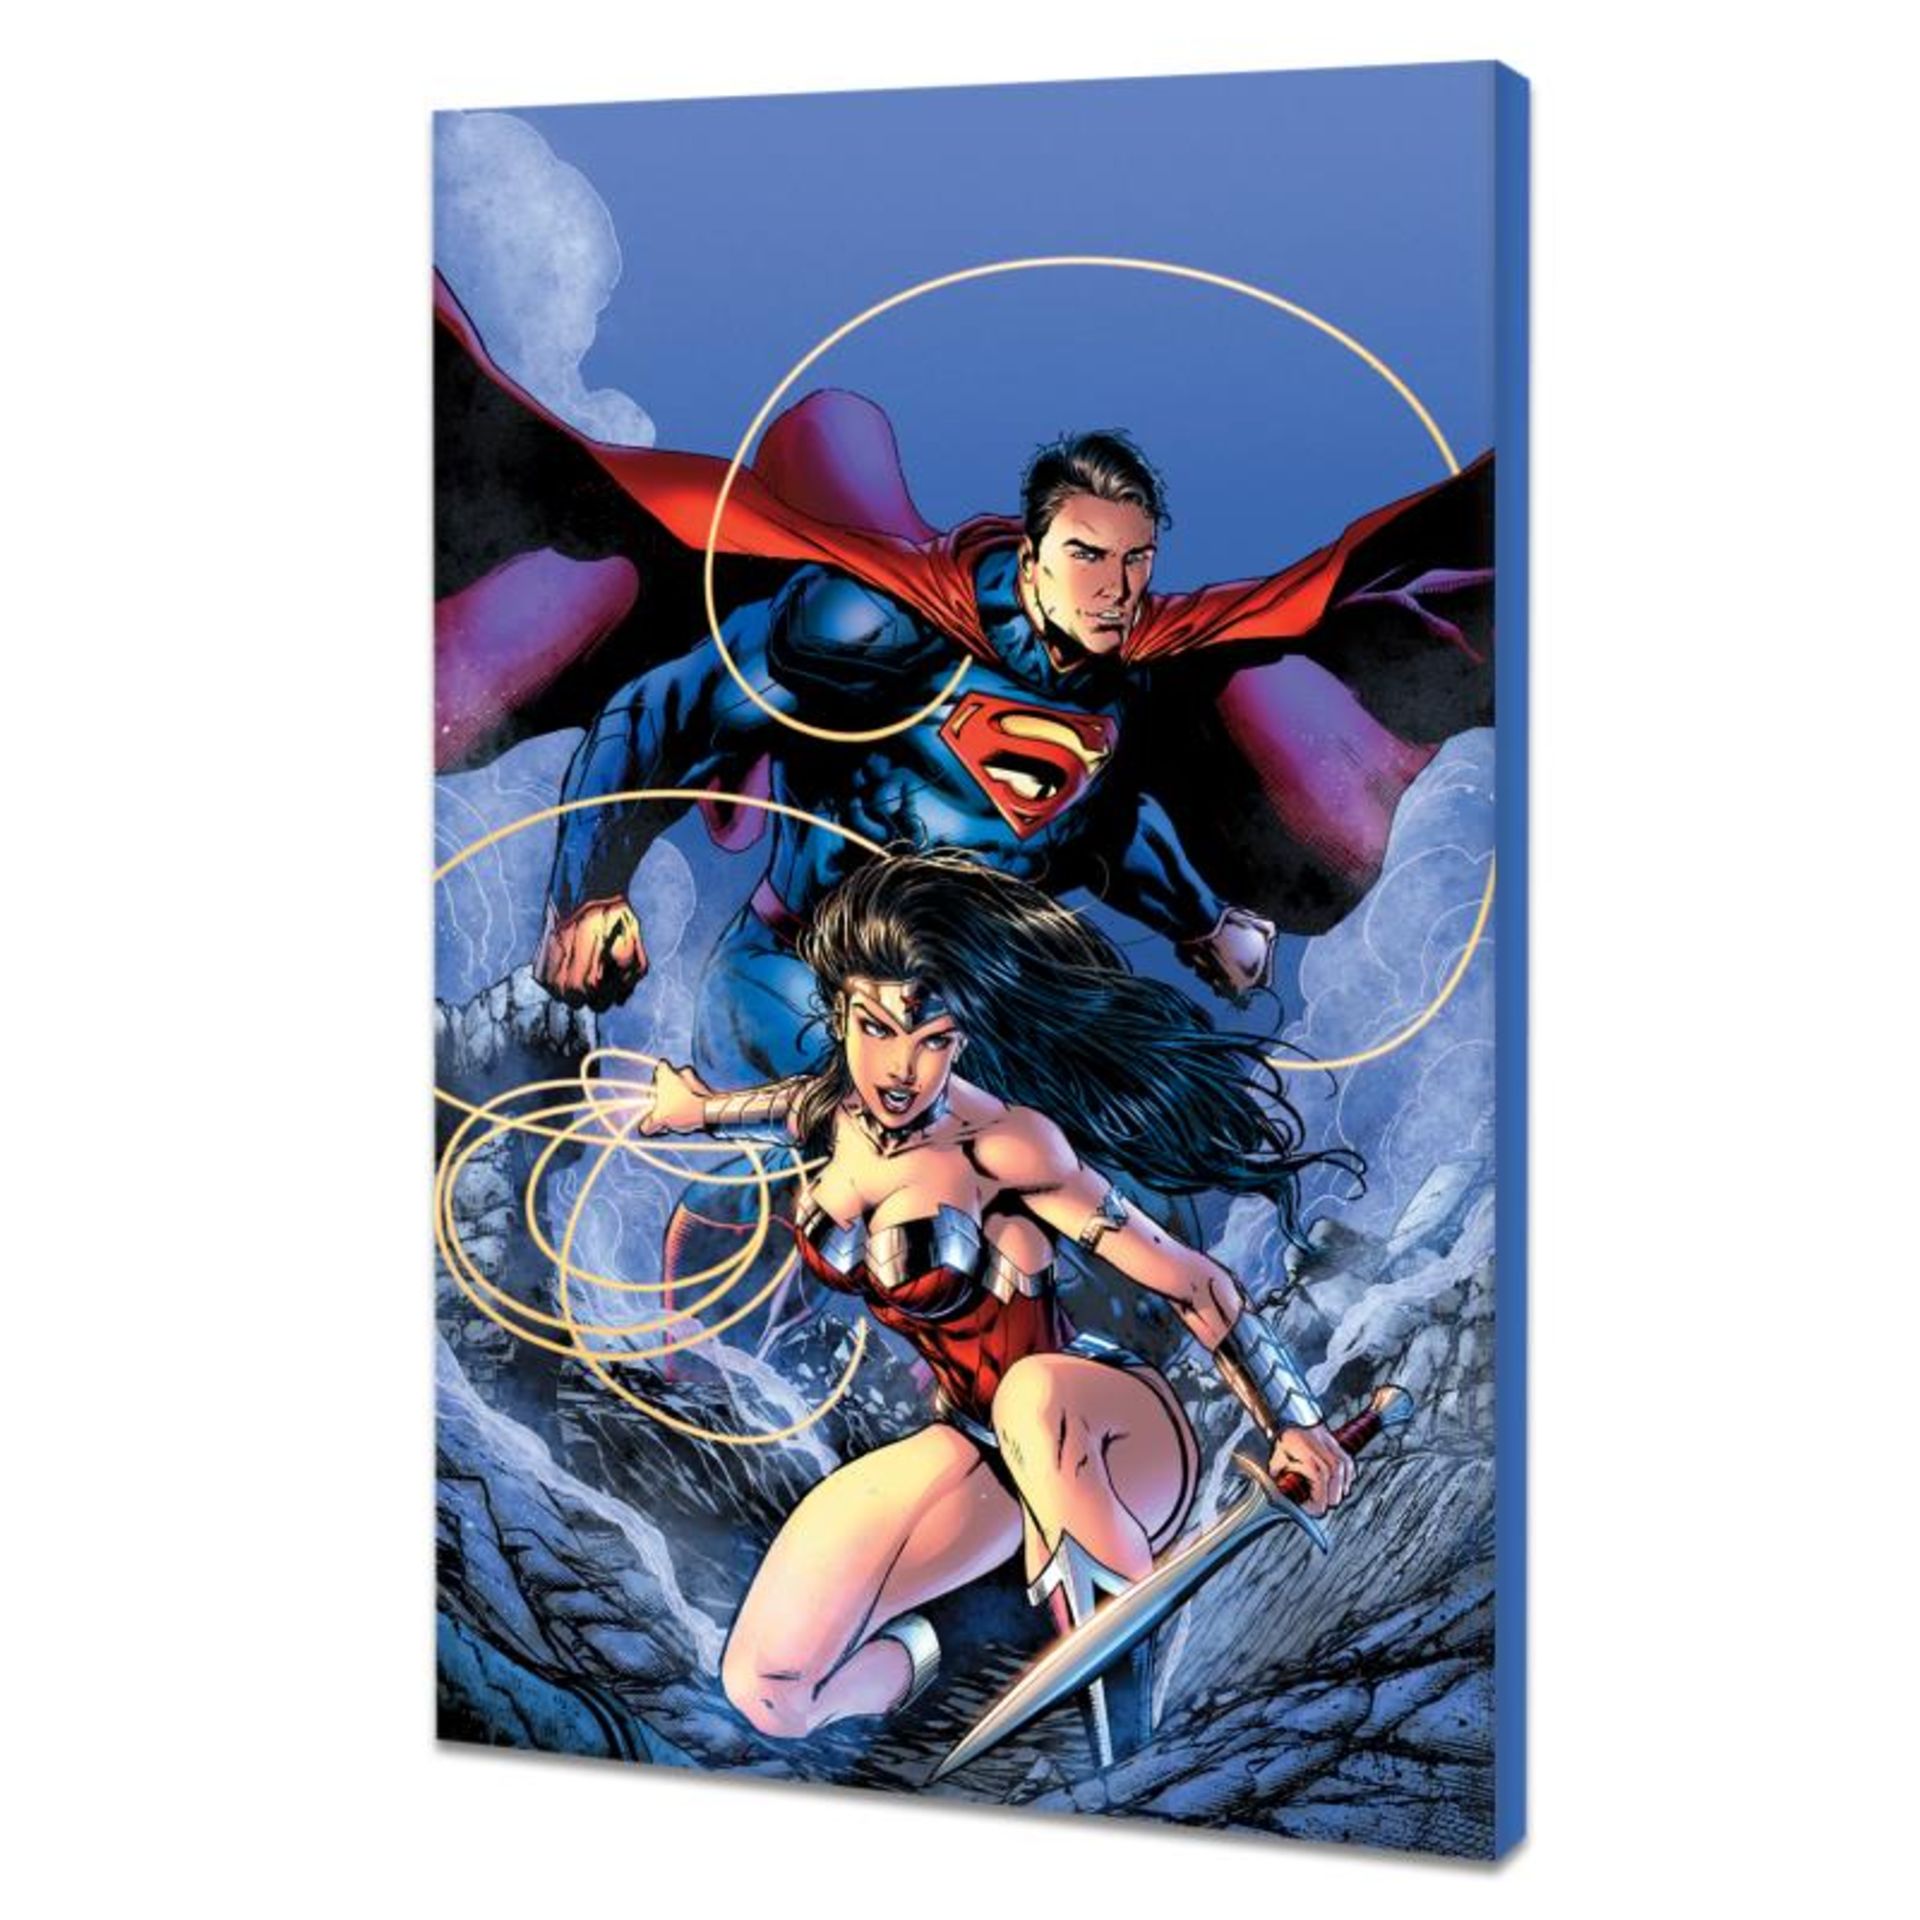 DC Comics, "Justice League (The New 52) #14" Numbered Limited Edition Giclee on - Image 7 of 8